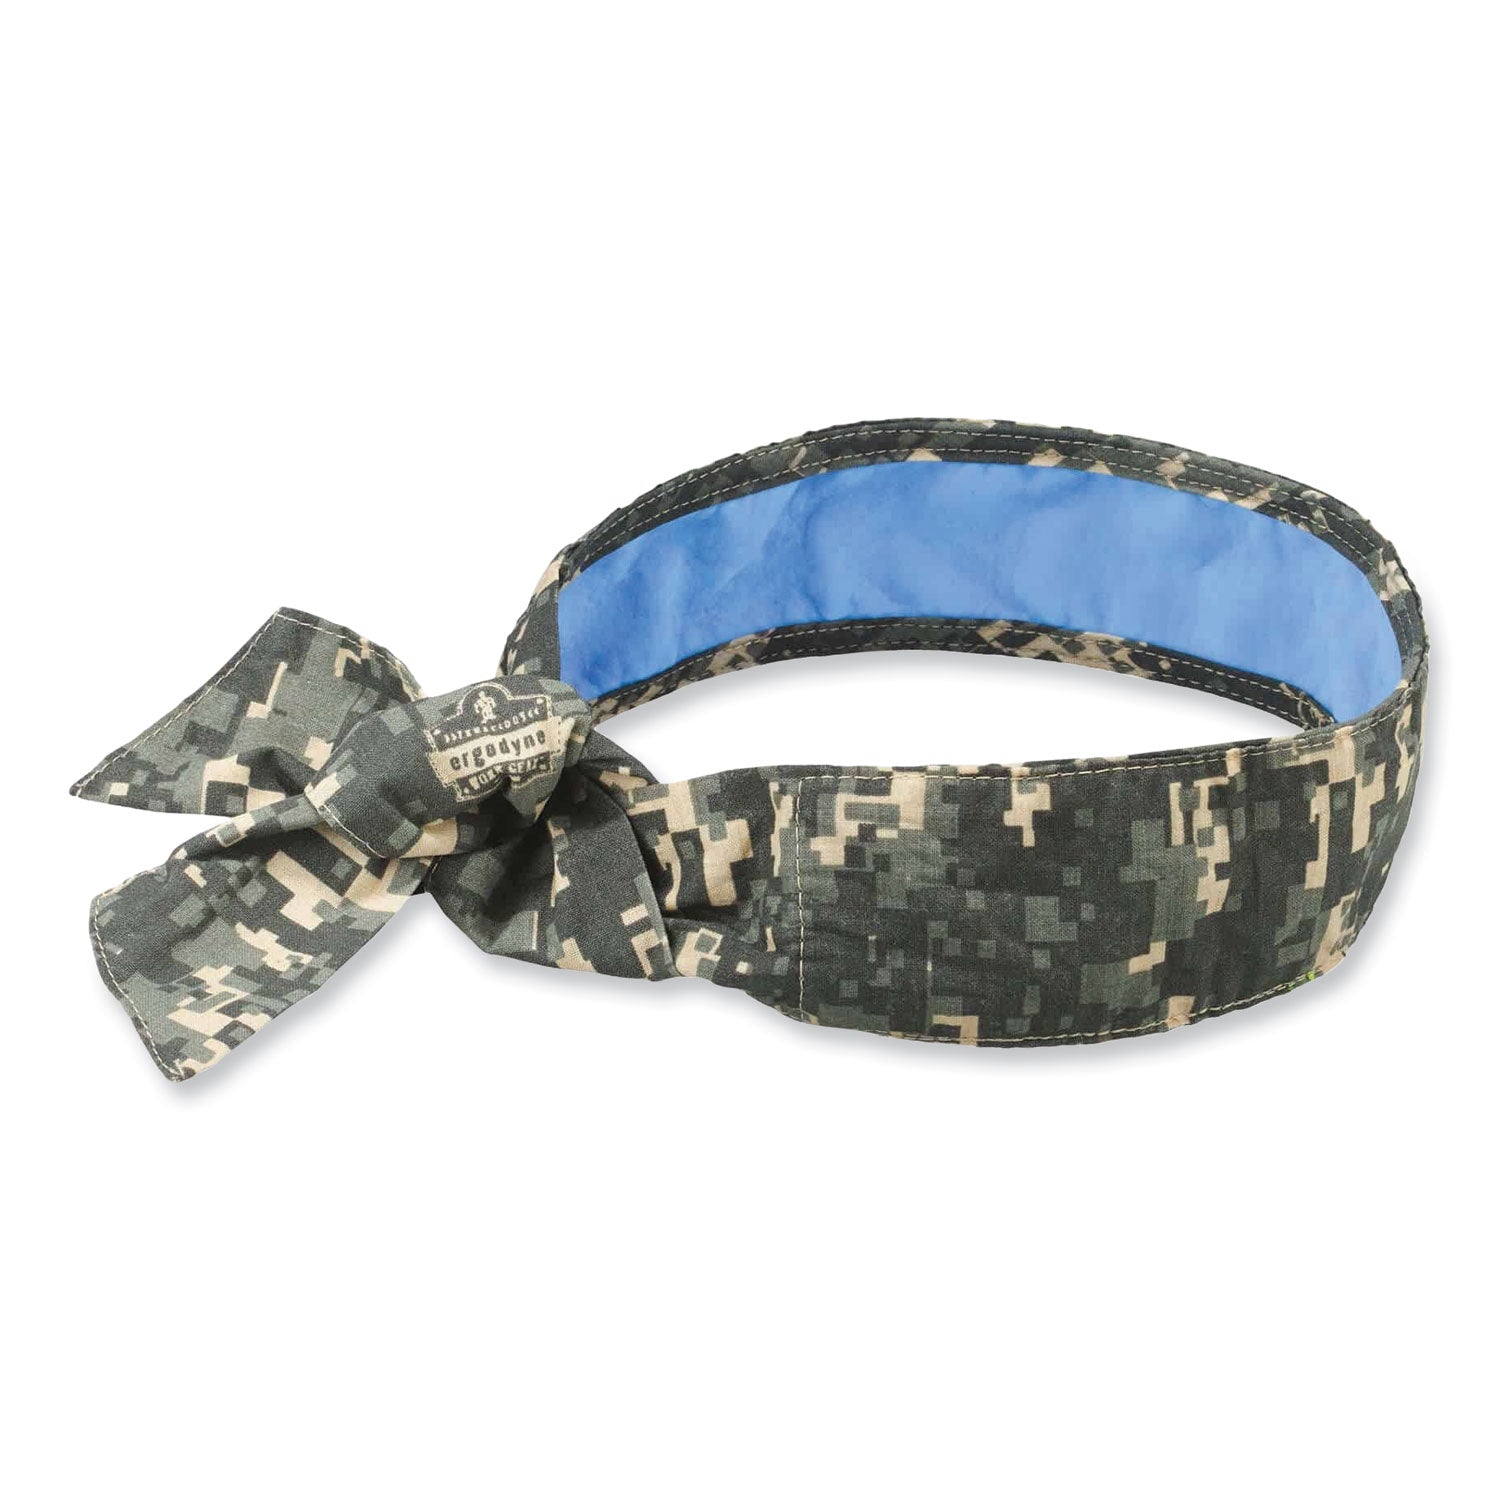 chill-its-6700ct-cooling-bandana-pva-tie-headband-one-size-fits-most-camo-ships-in-1-3-business-days_ego12562 - 1